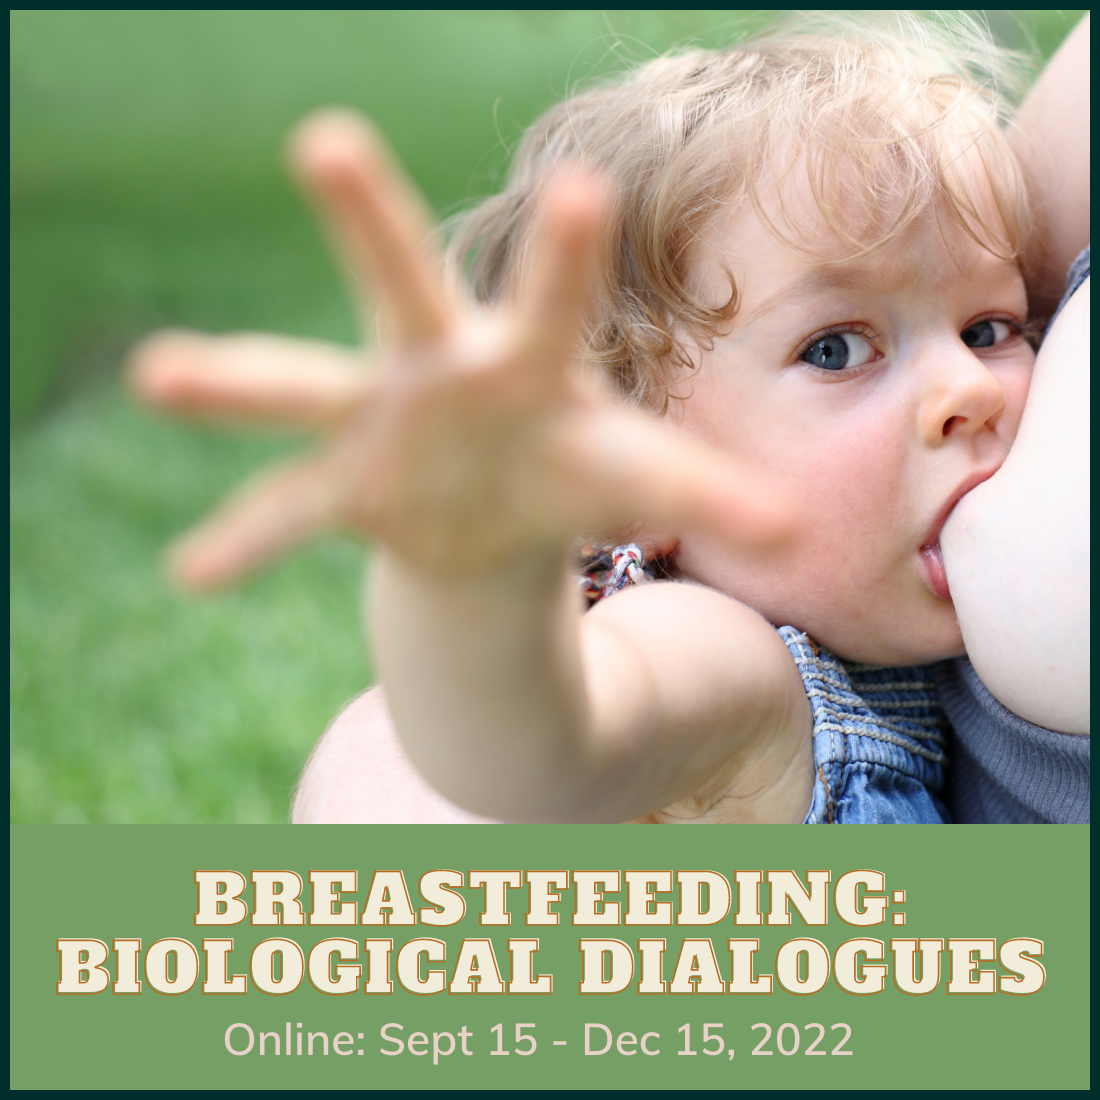 Insta picture - Breastfeeding: biological dialogues